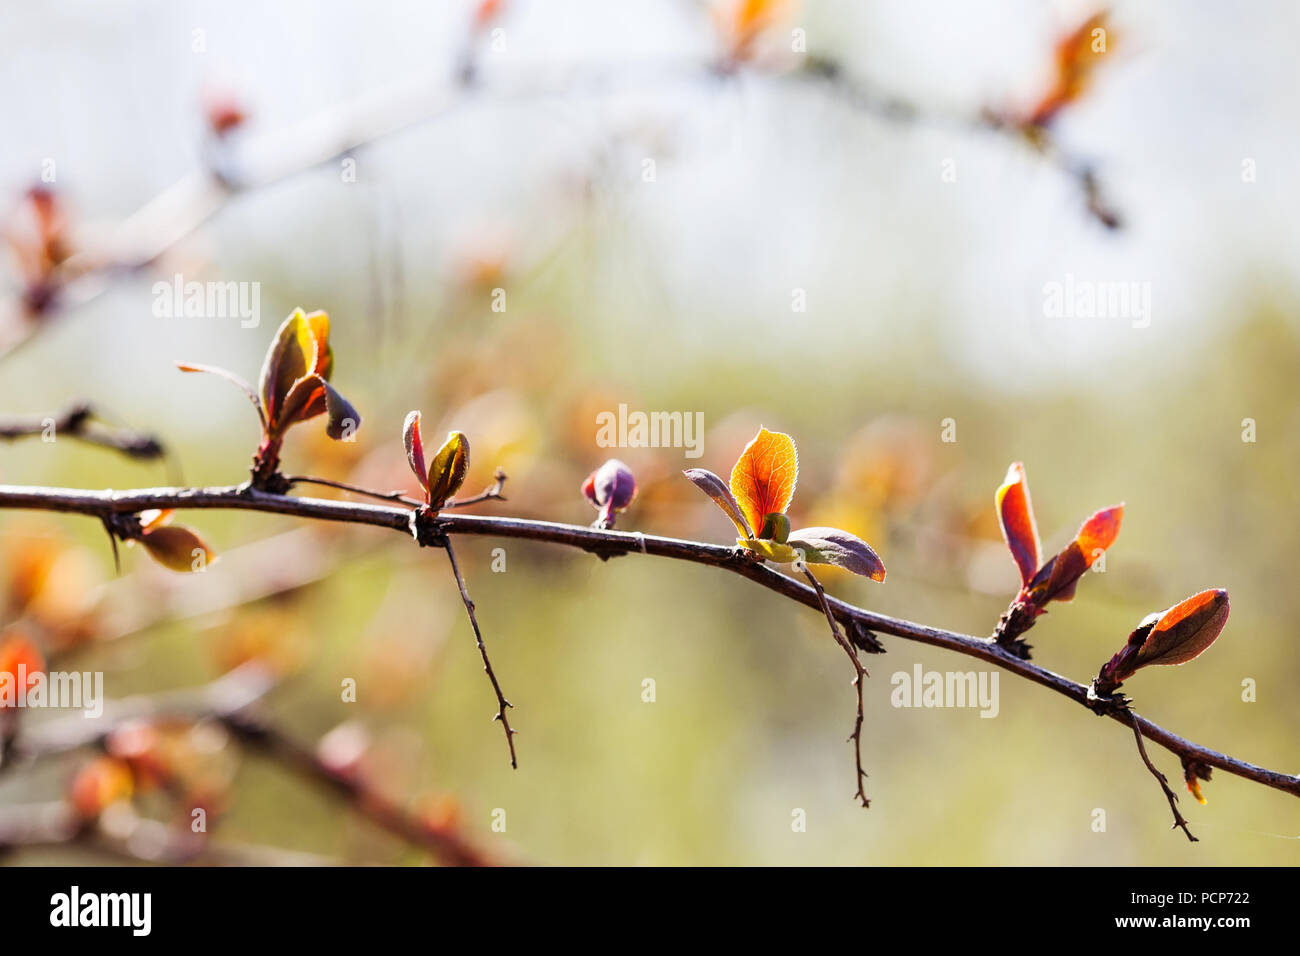 Beautiful spring time floral background with red leaves branch. Shallow depth of field, bright colors photography. Stock Photo